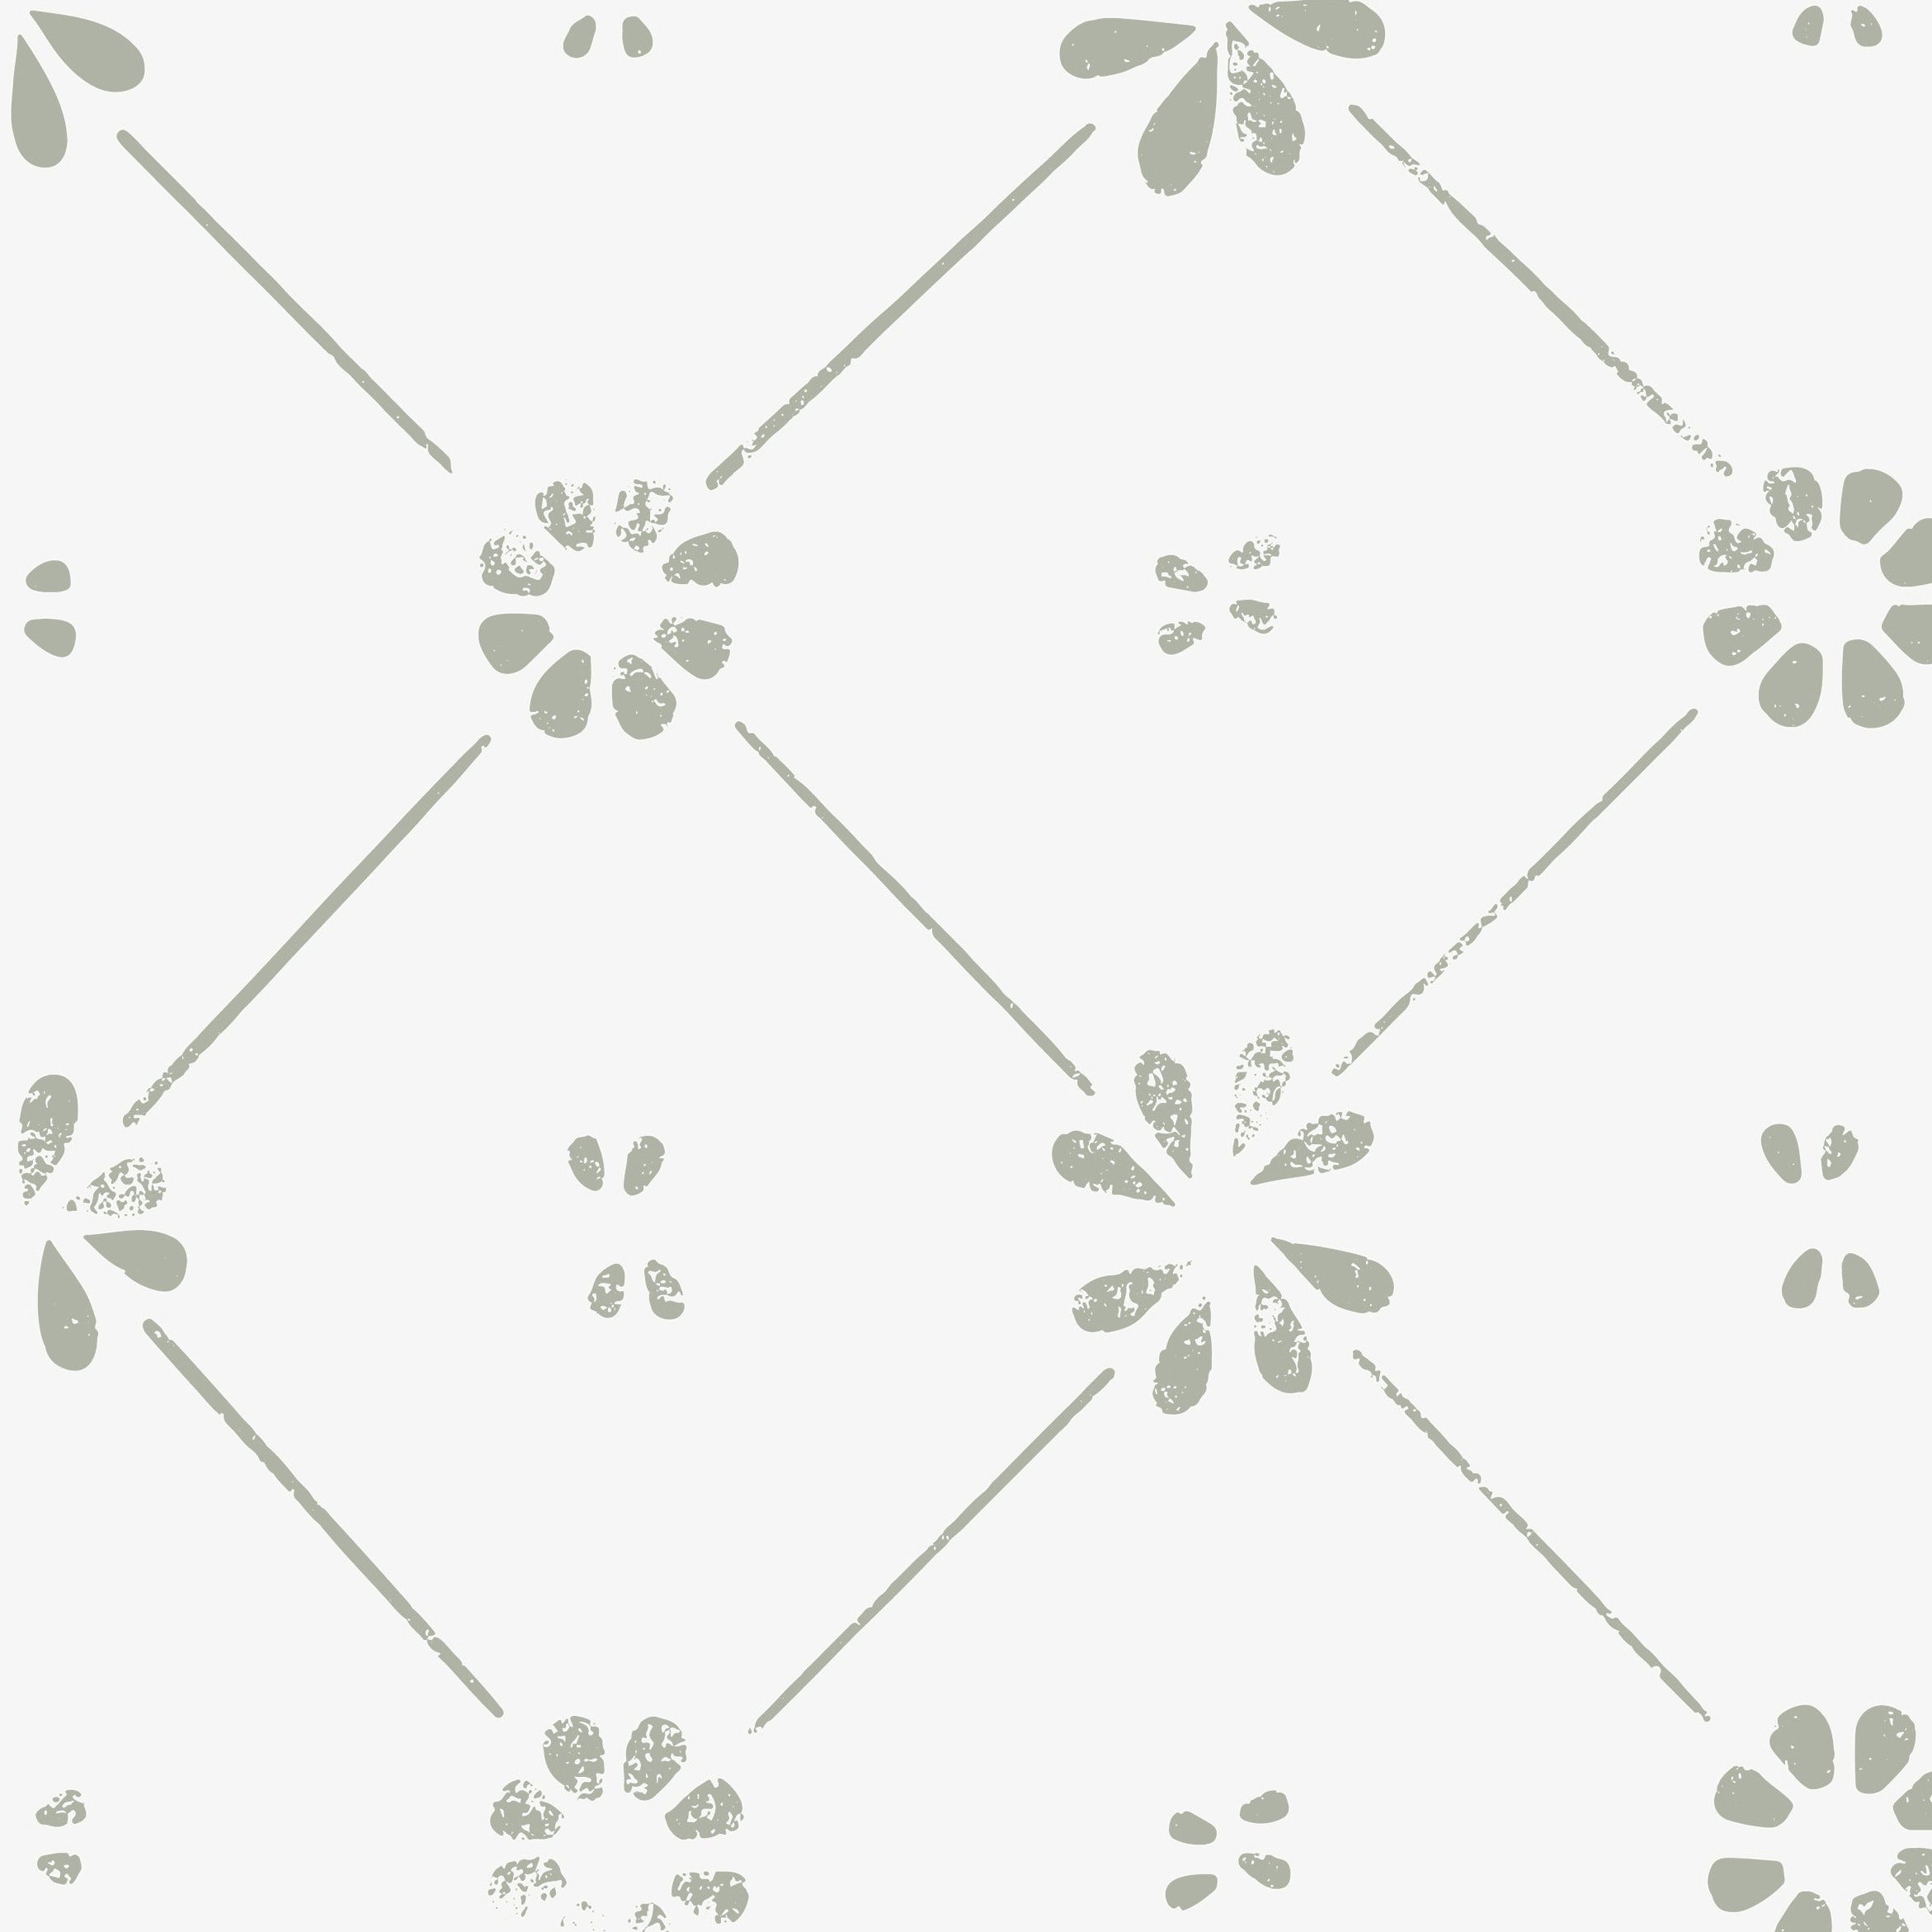 A close-up view of the Floral Lattice Wallpaper, showcasing the intricate green floral design and lattice pattern on a white background. The pattern includes small flower clusters connected by fine lines, creating a subtle and elegant look.